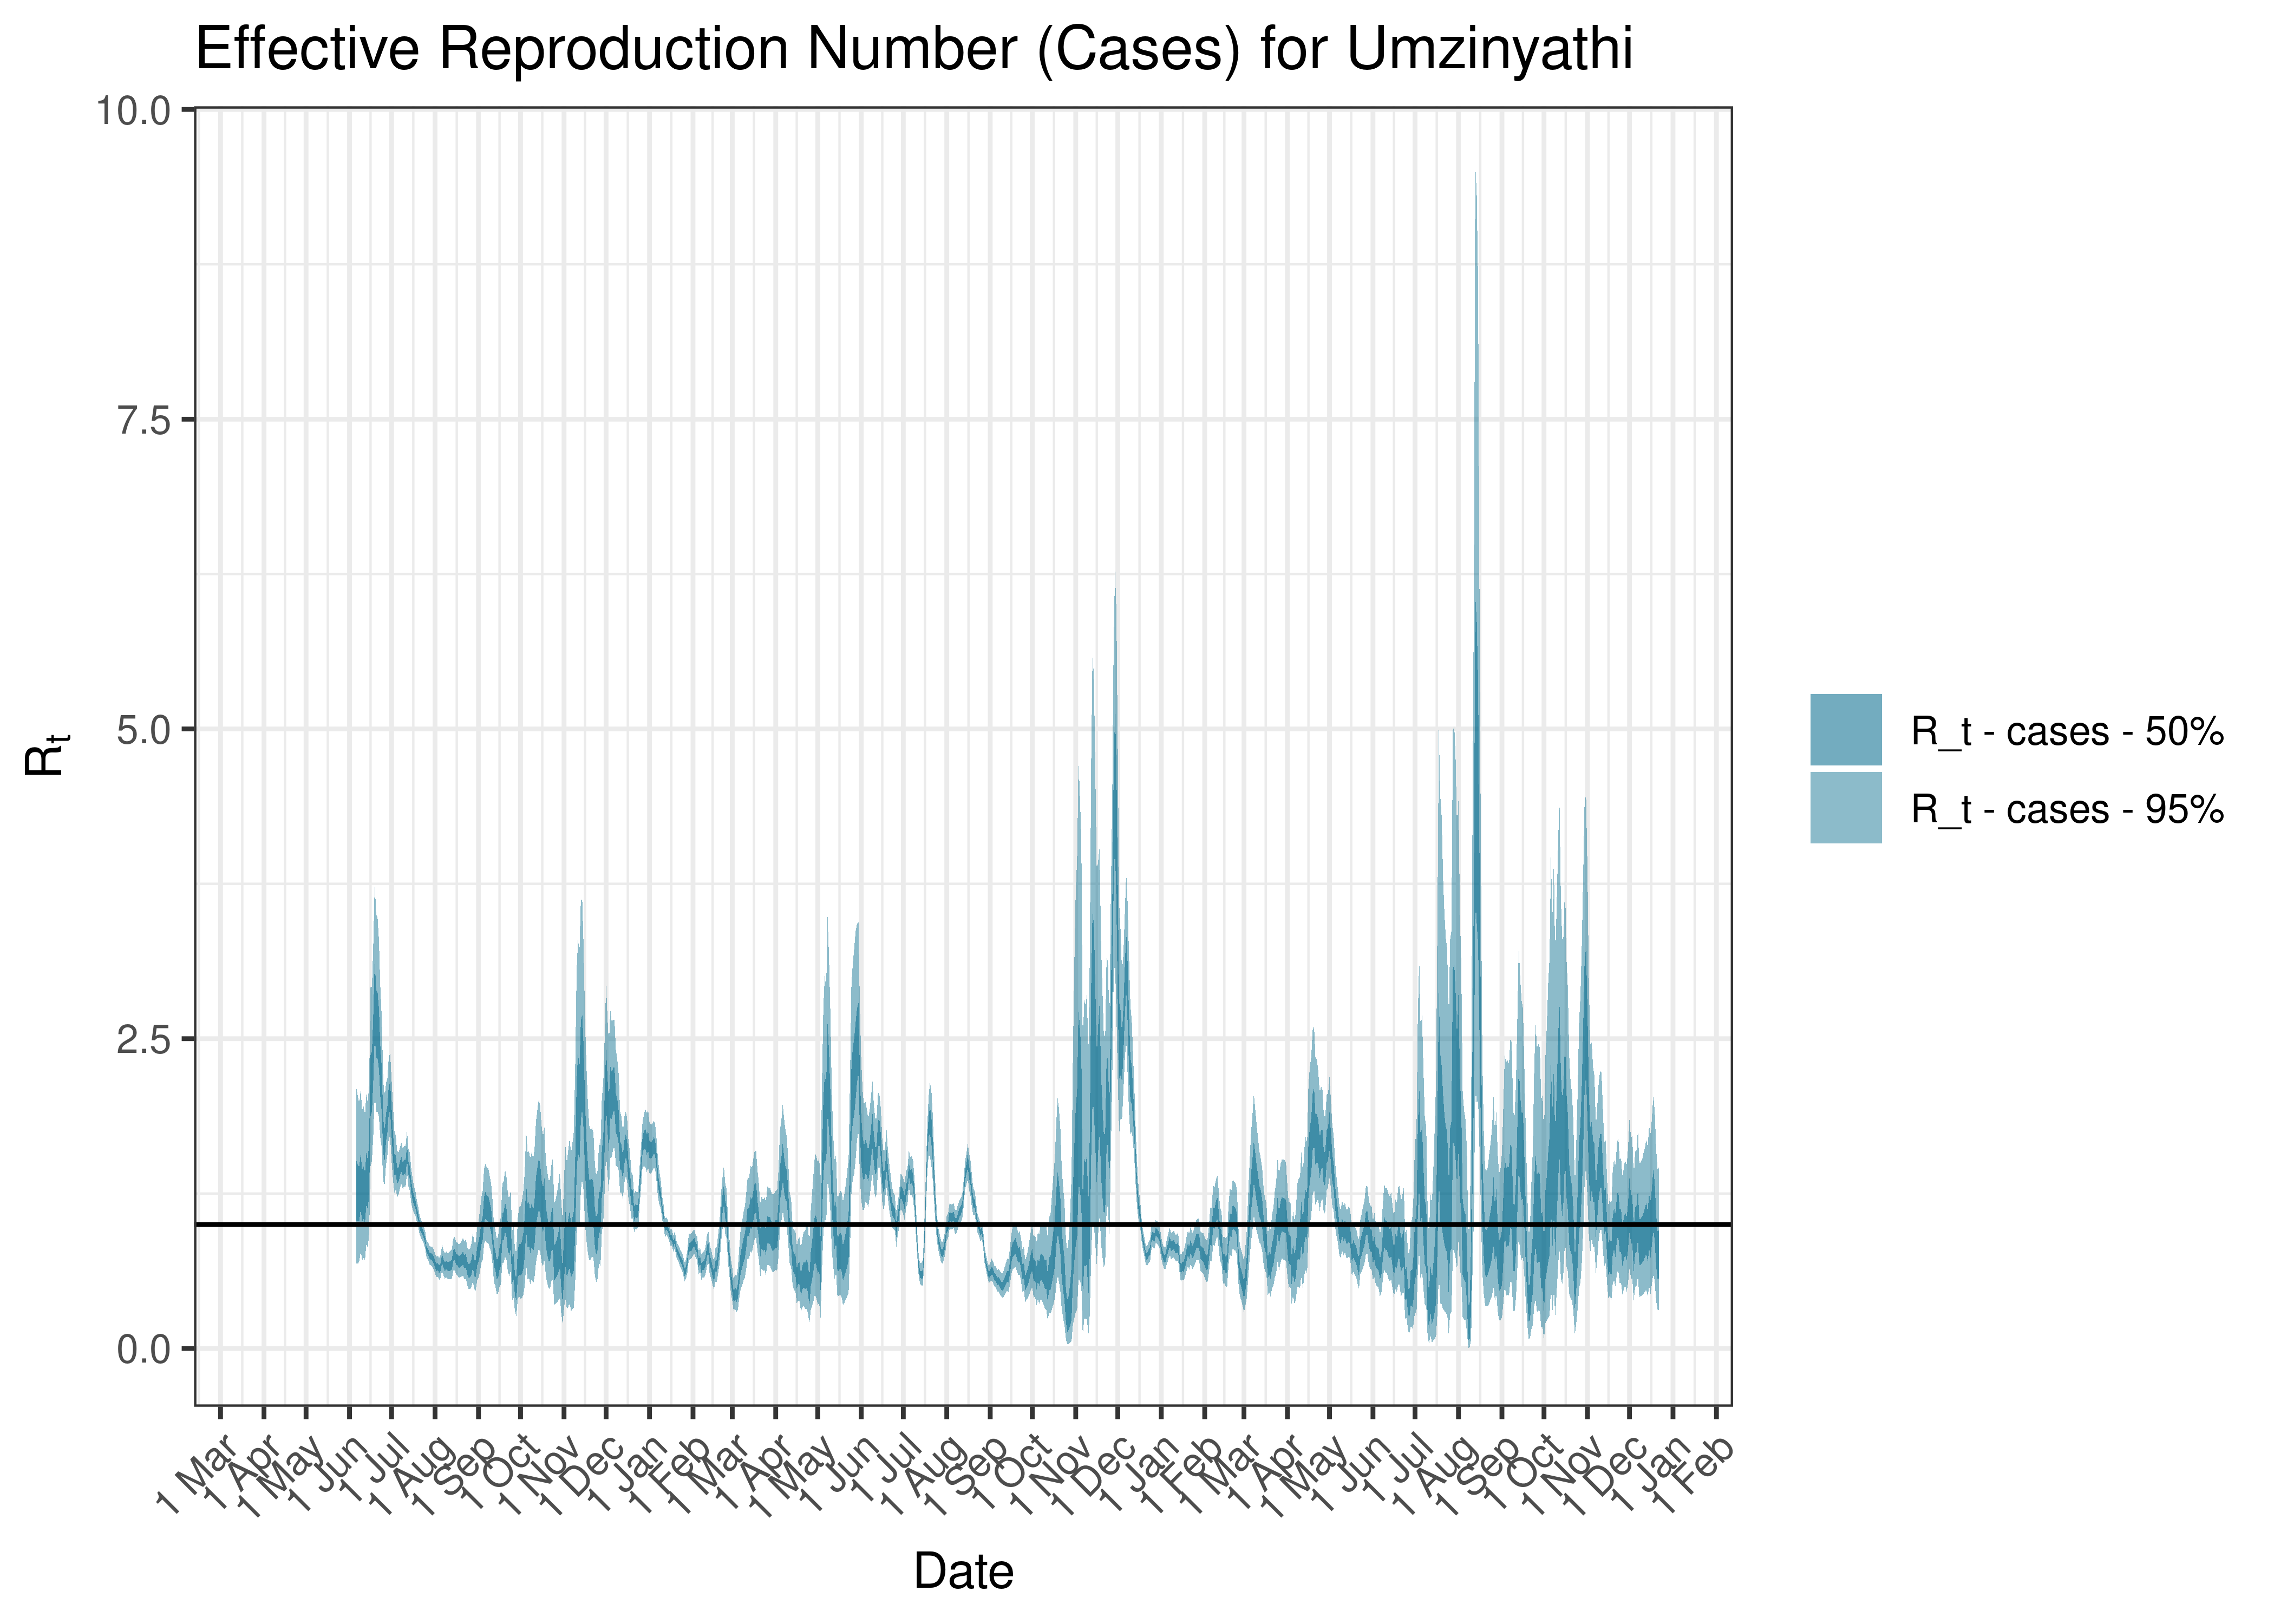 Estimated Effective Reproduction Number Based on Cases for Umzinyathi since 1 April 2020